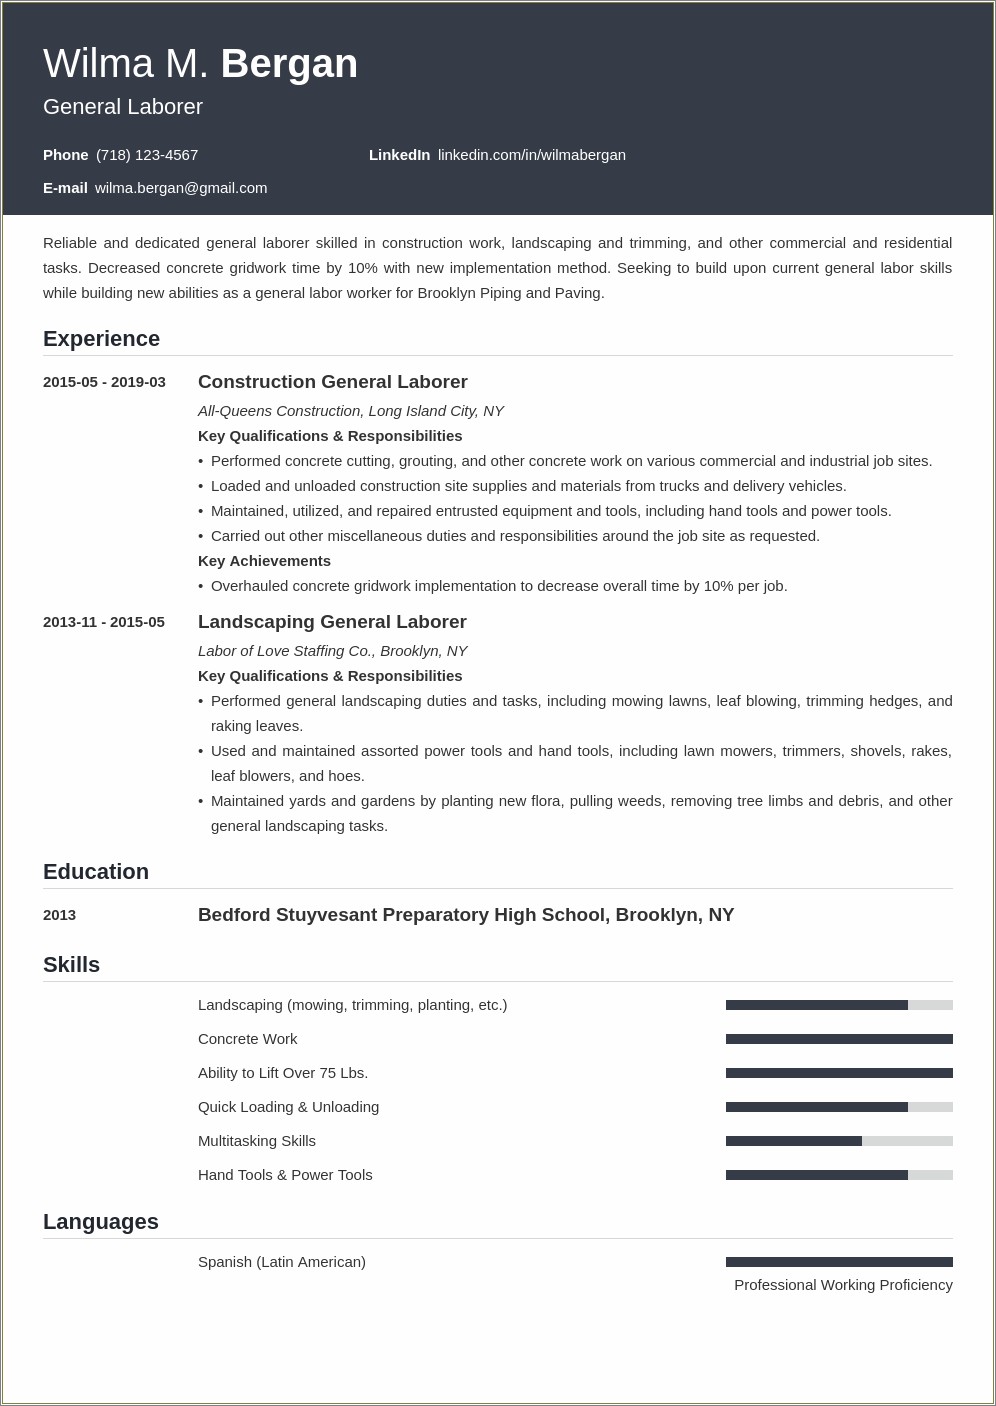 Best Objective For Resume For Agriculture